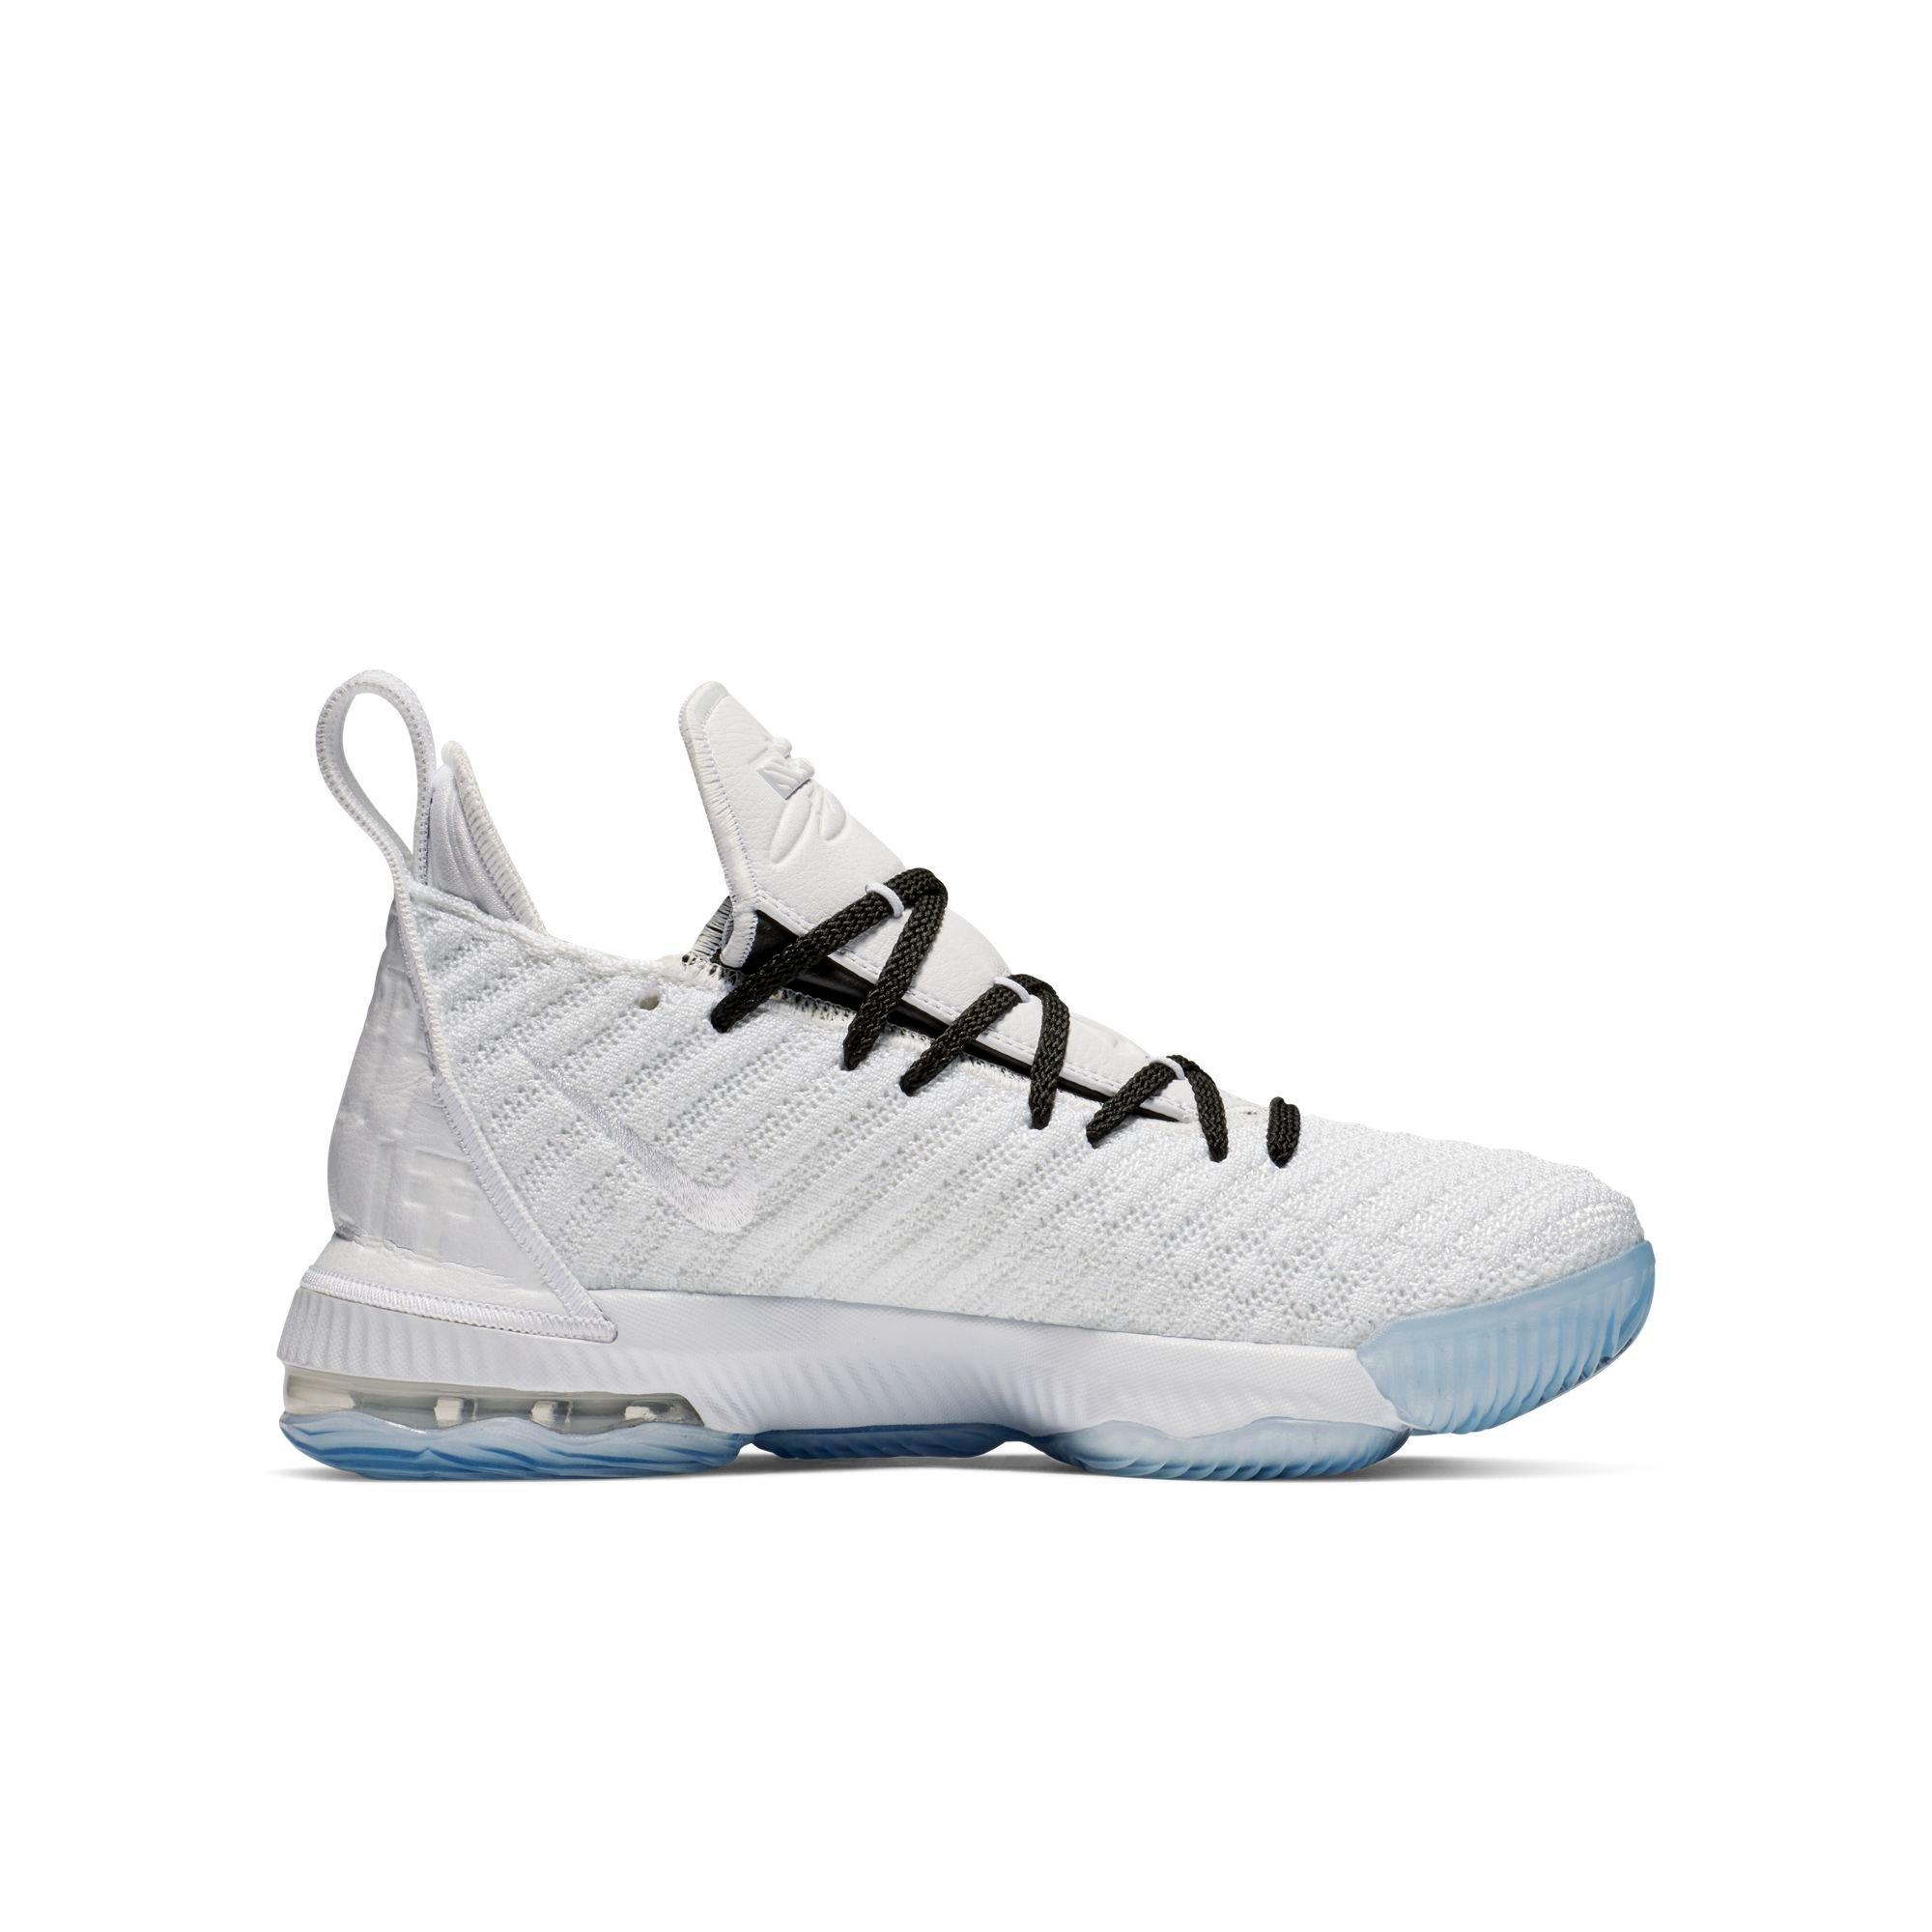 lebron 16 shoes youth